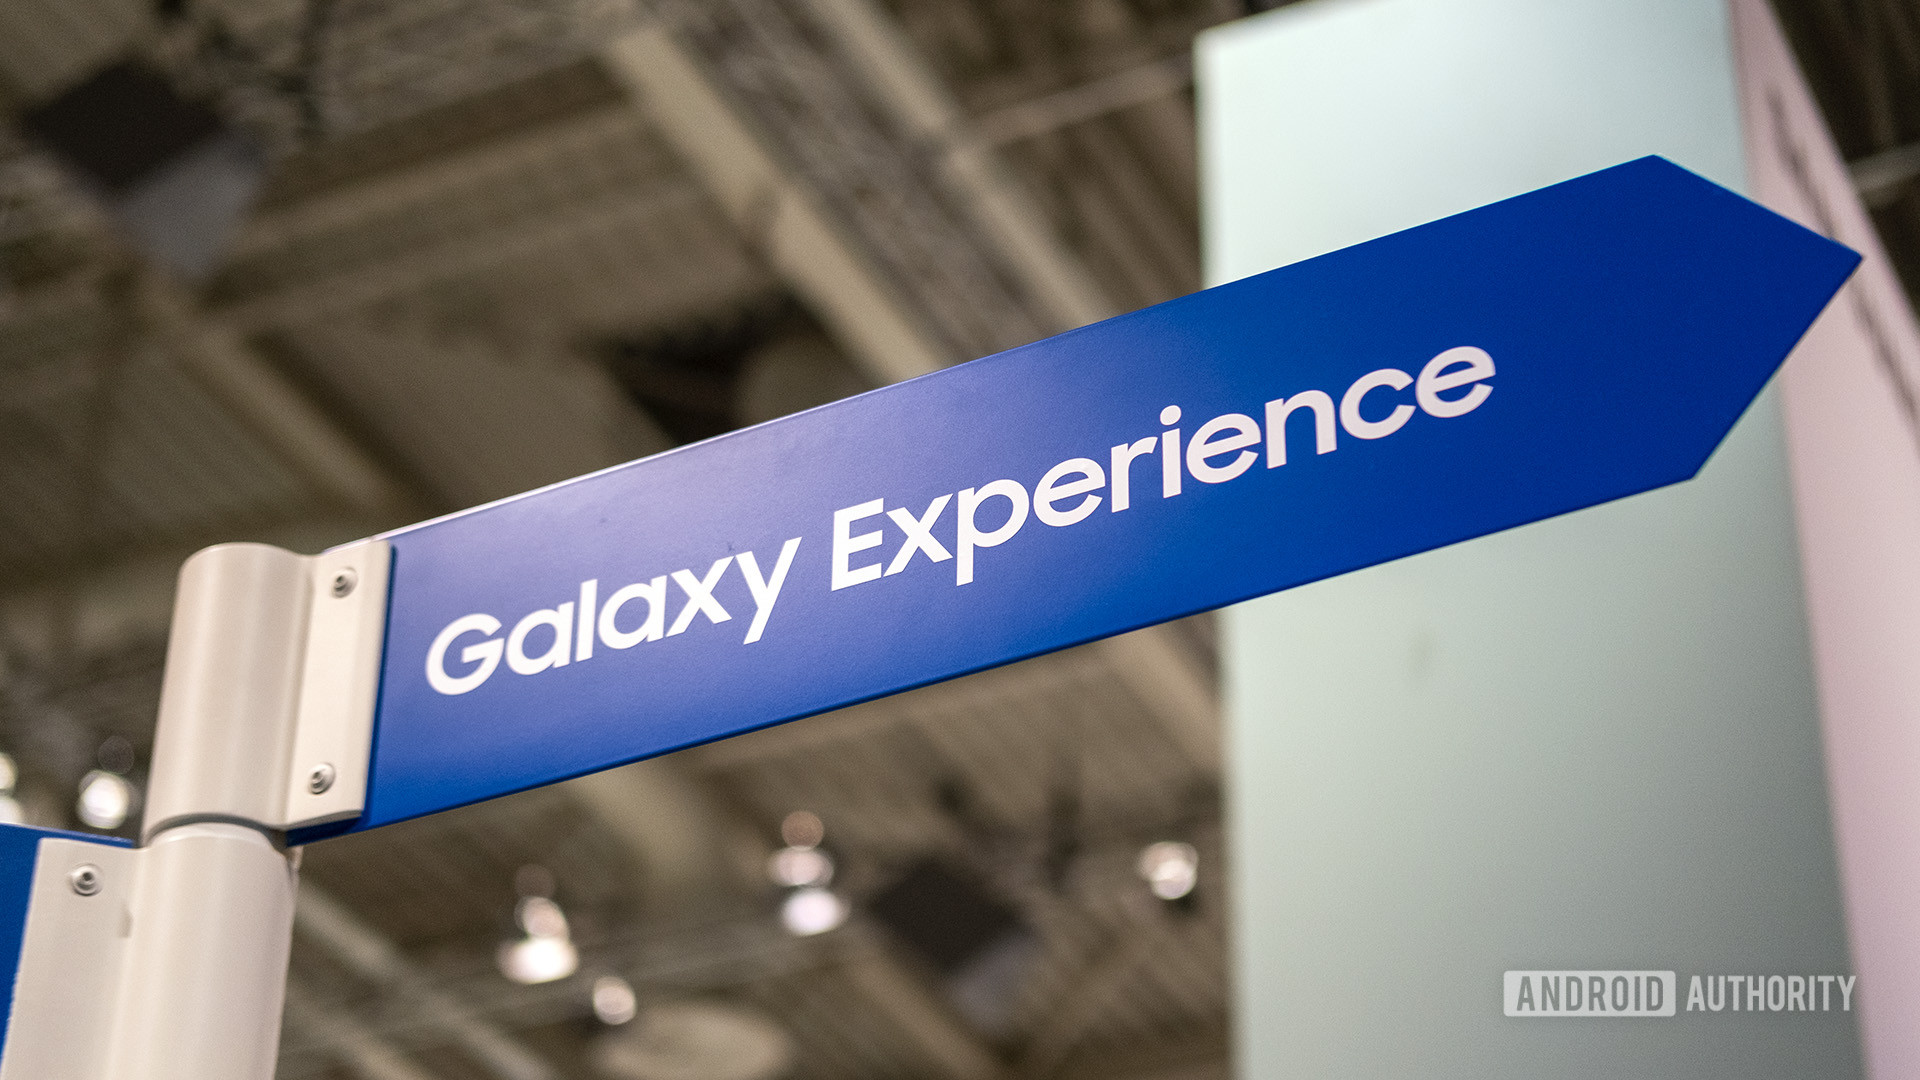 Forward of Galaxy S23 launch, Samsung expects dip in smartphone demand